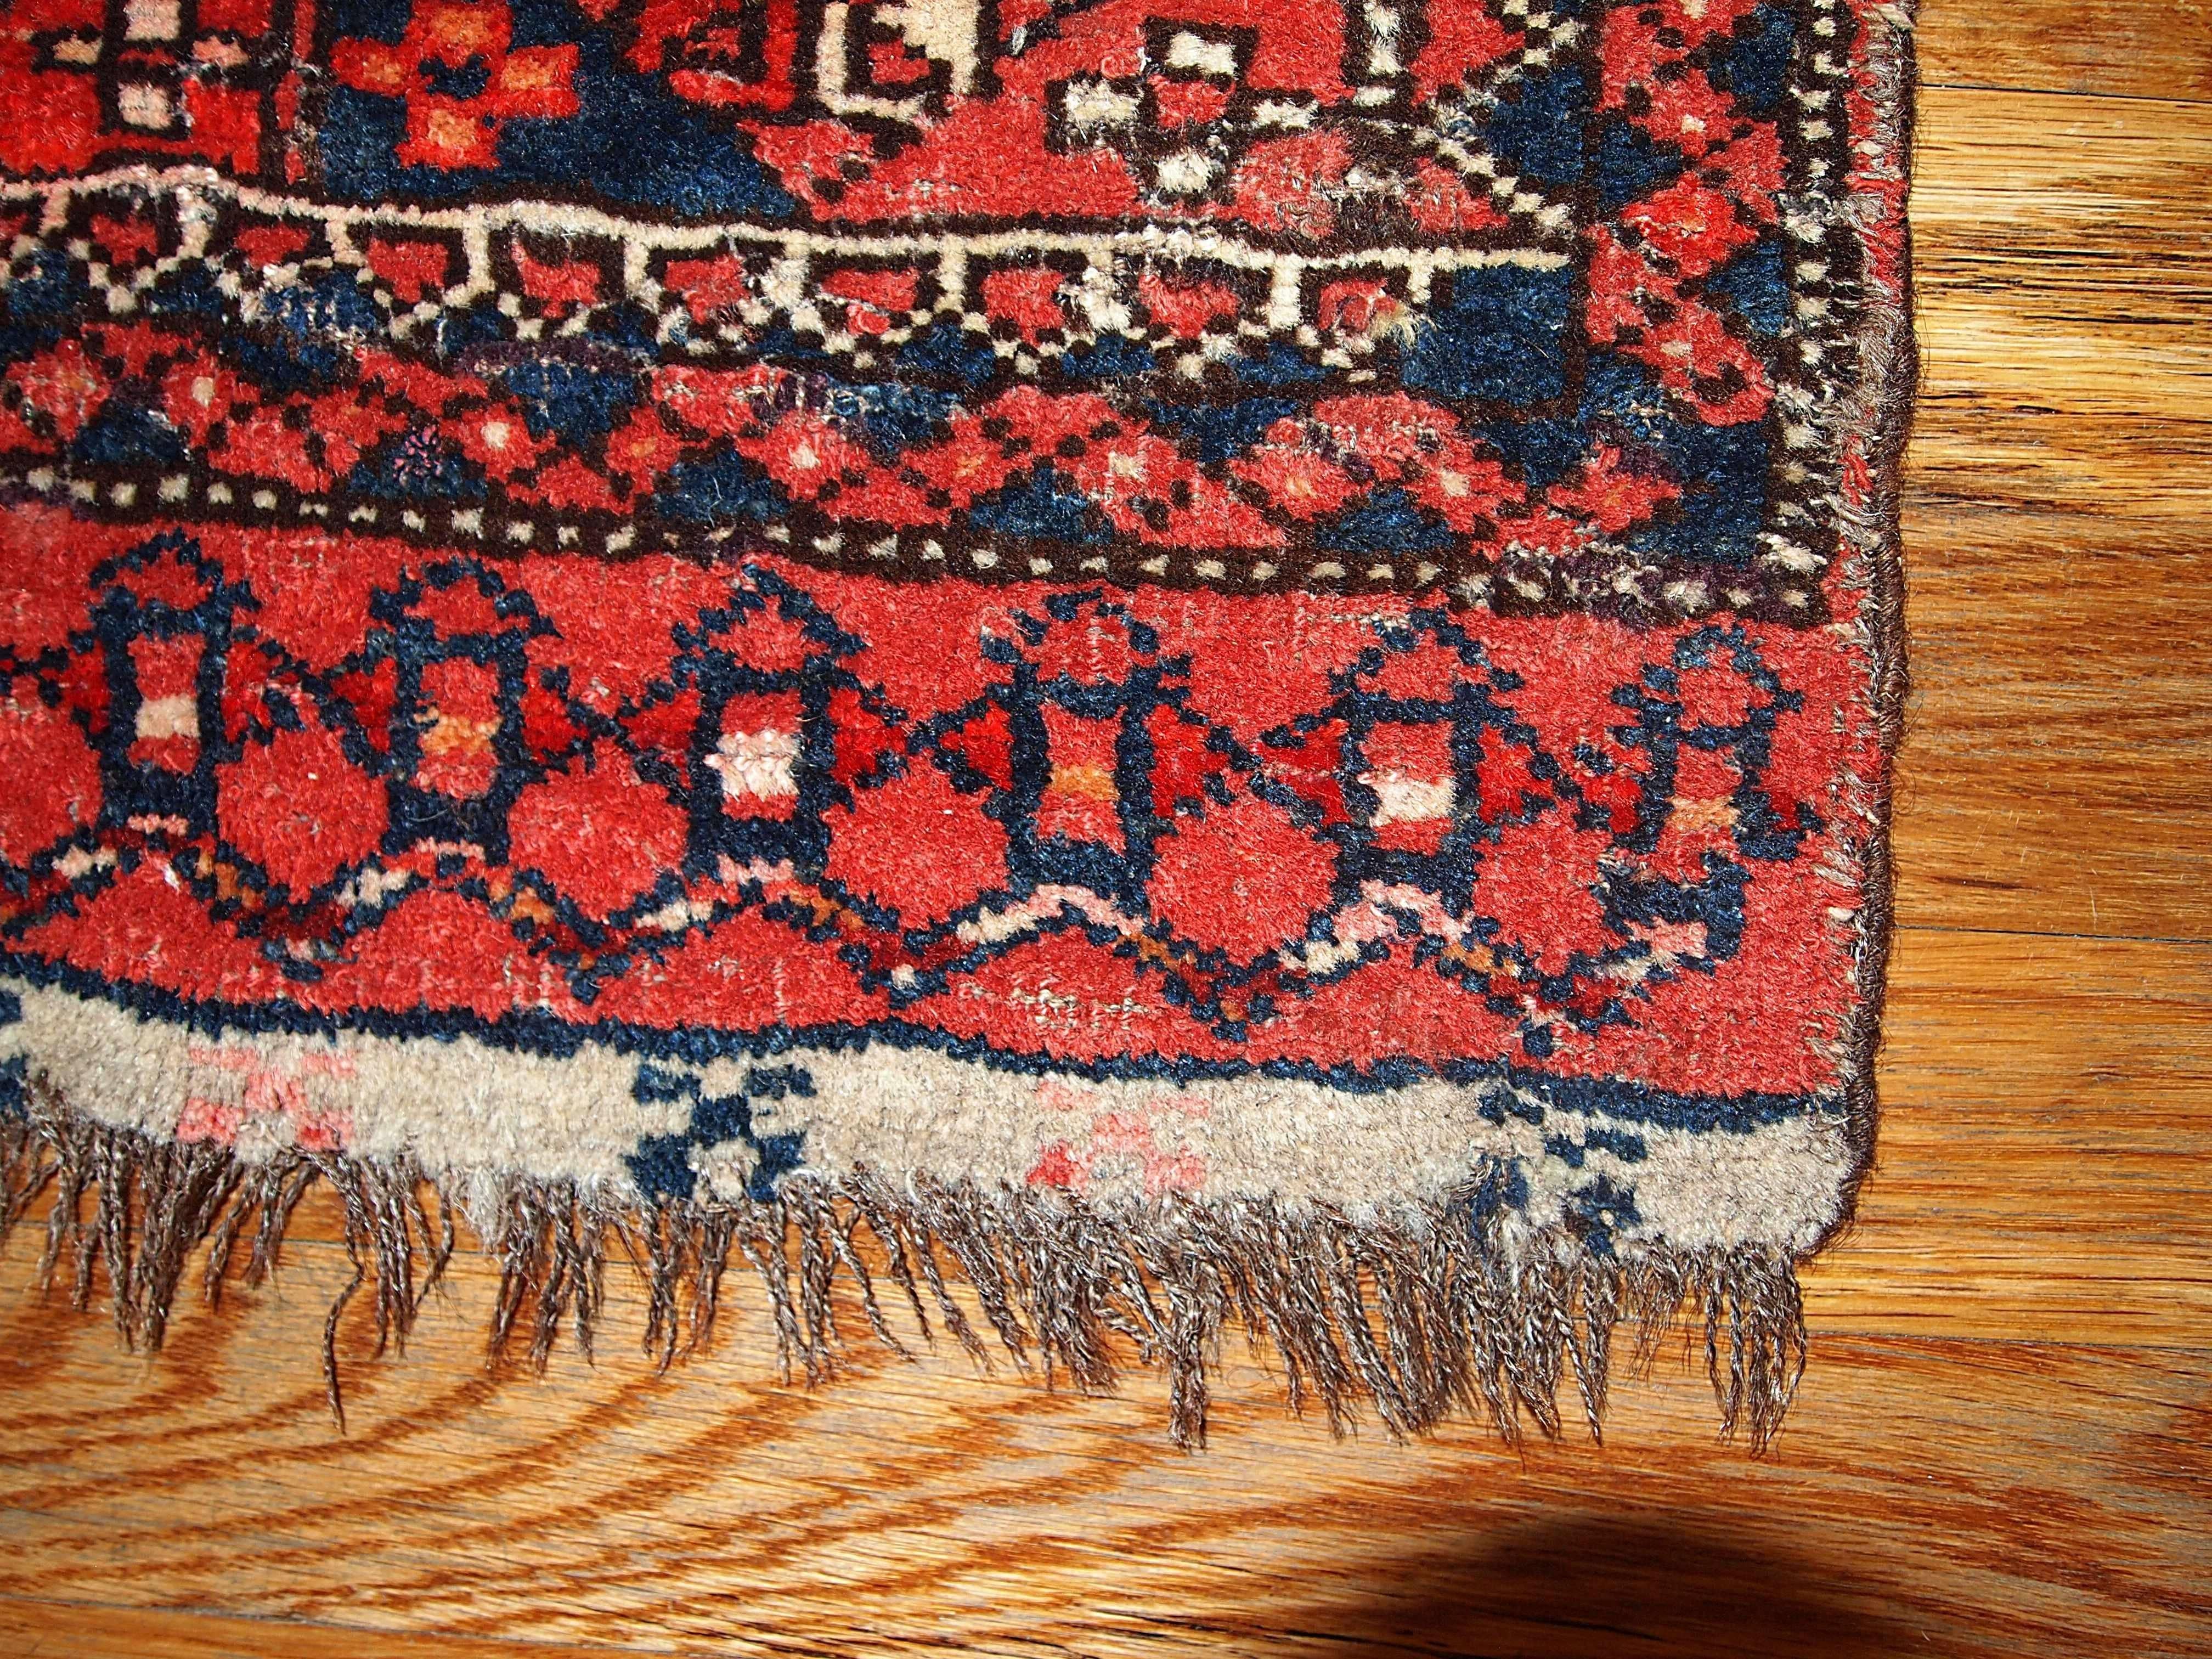 This handmade antique collectible Uzbek bag face has extremely beautiful colors. Bright red and bright yellow in combination with navy blue. The rug is dated as 19th century and has elegant tribal design.